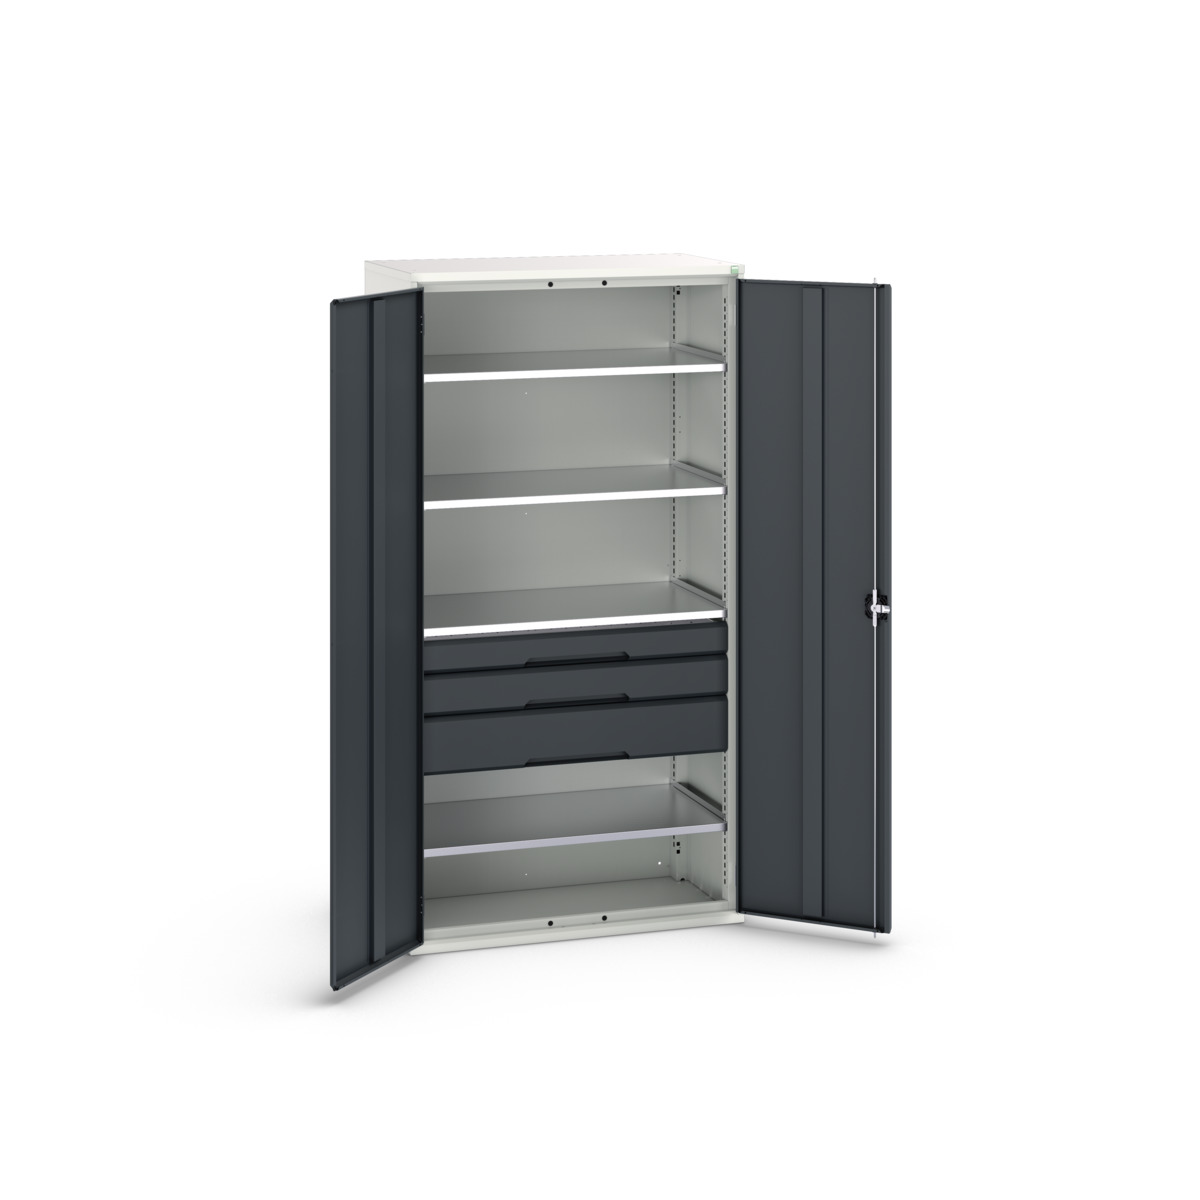 16926575.19 - verso kitted cupboard